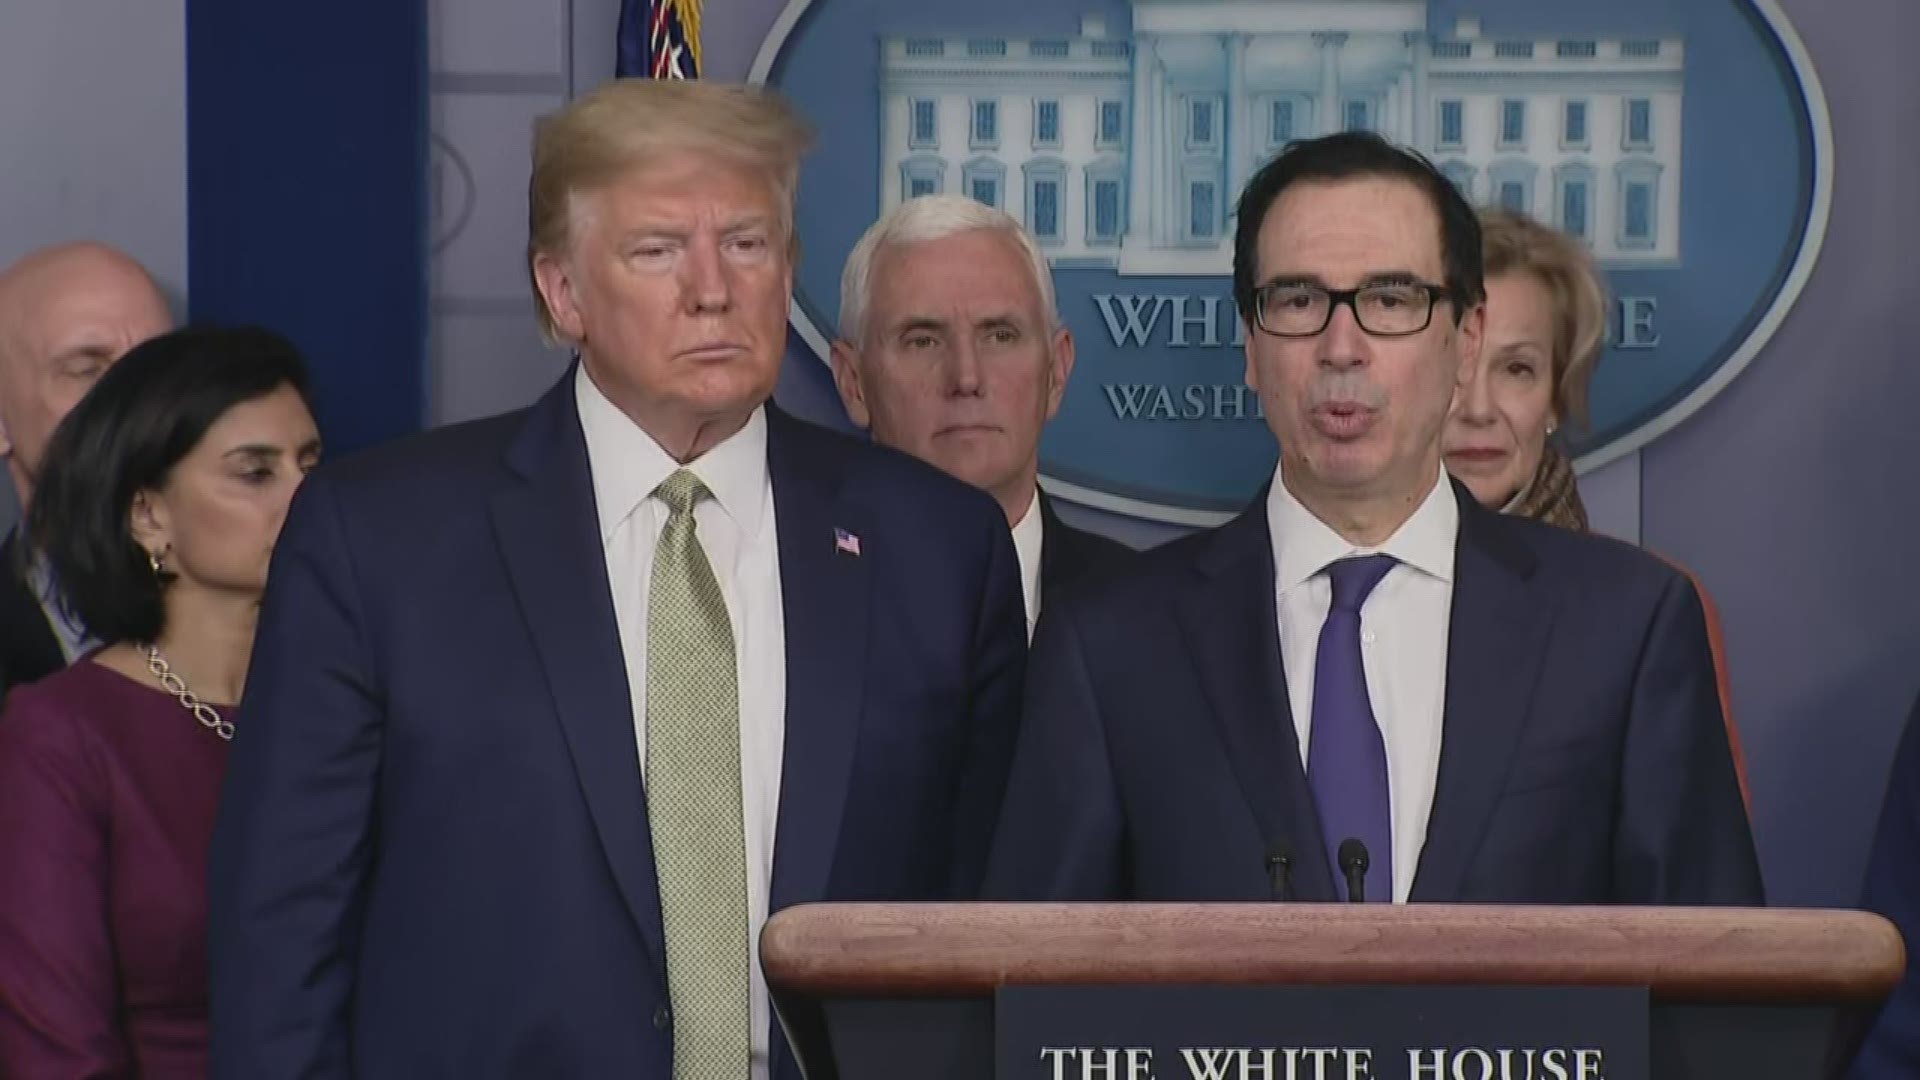 Treasury Secretary Steve Mnuchin says the airline industry has almost been ground to a halt by the coronavirus pandemic.